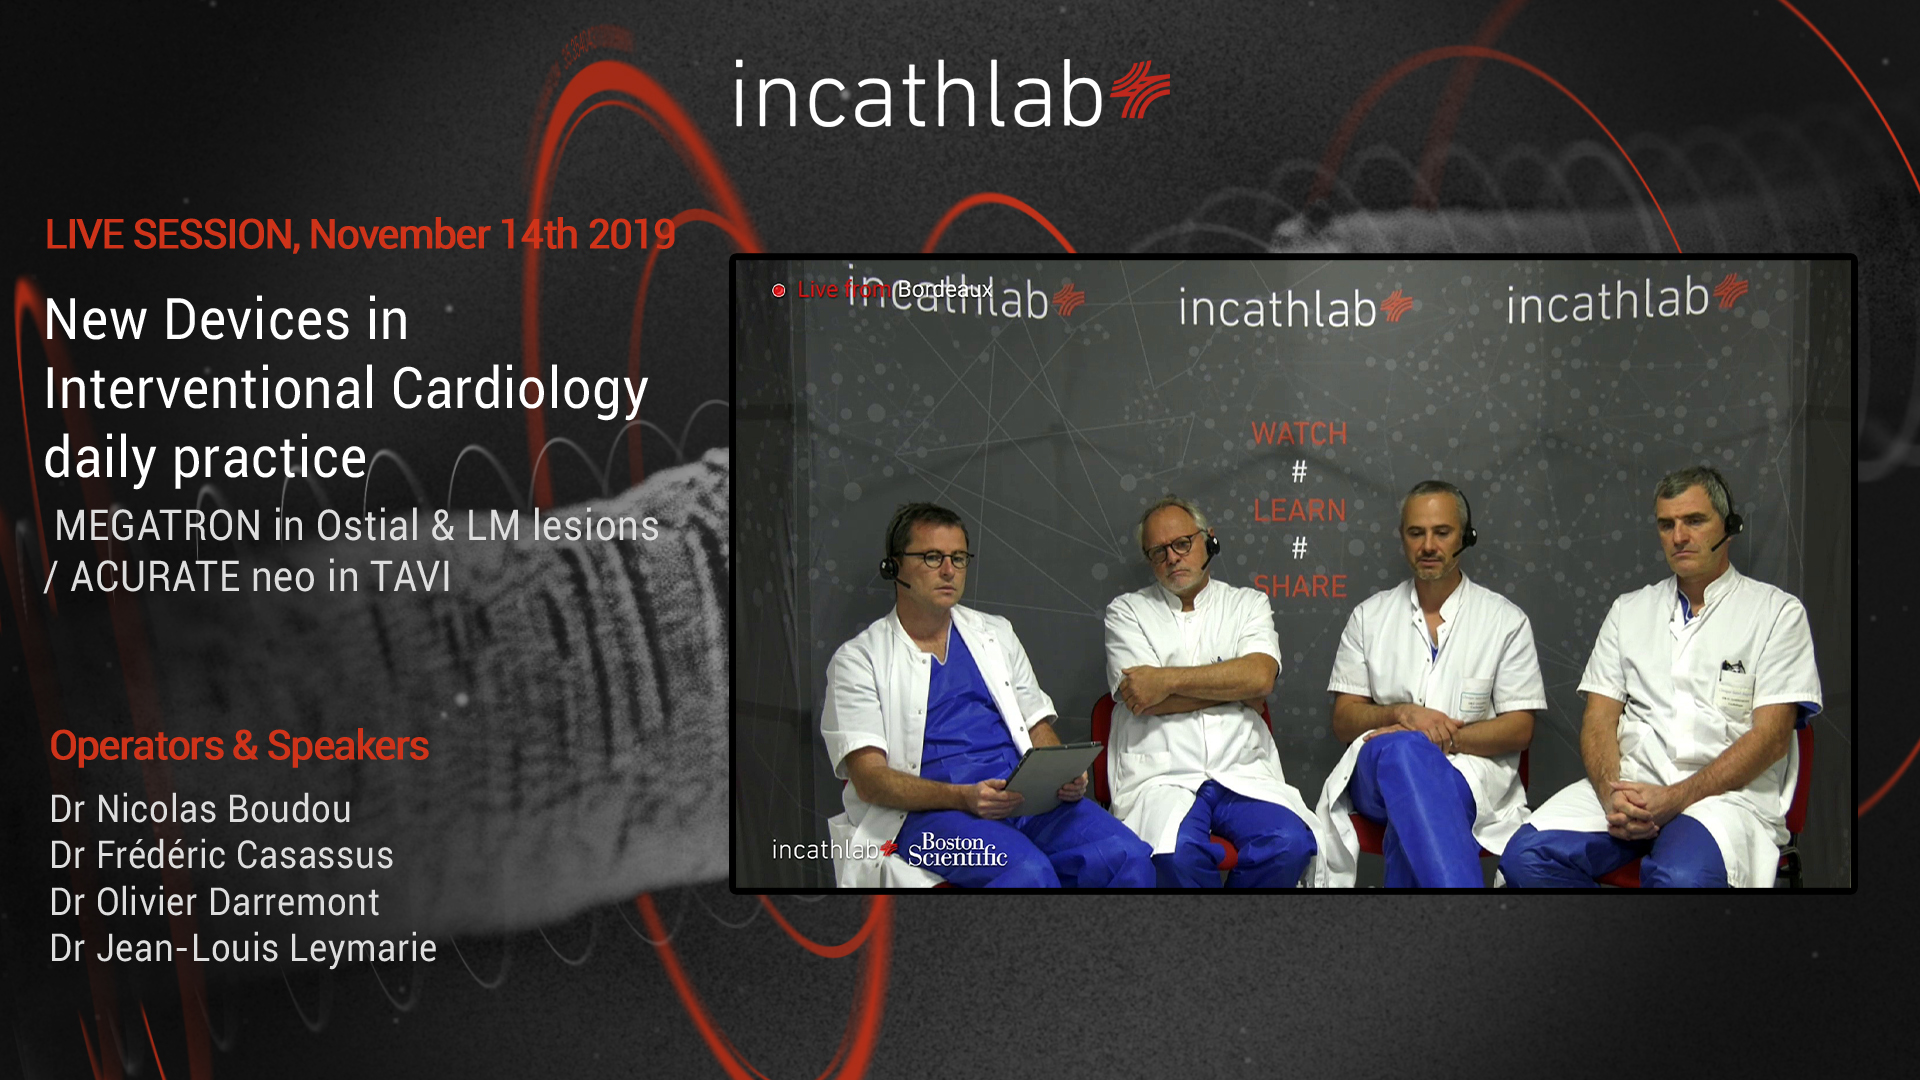 New Devices in Interventional Cardiology daily practice